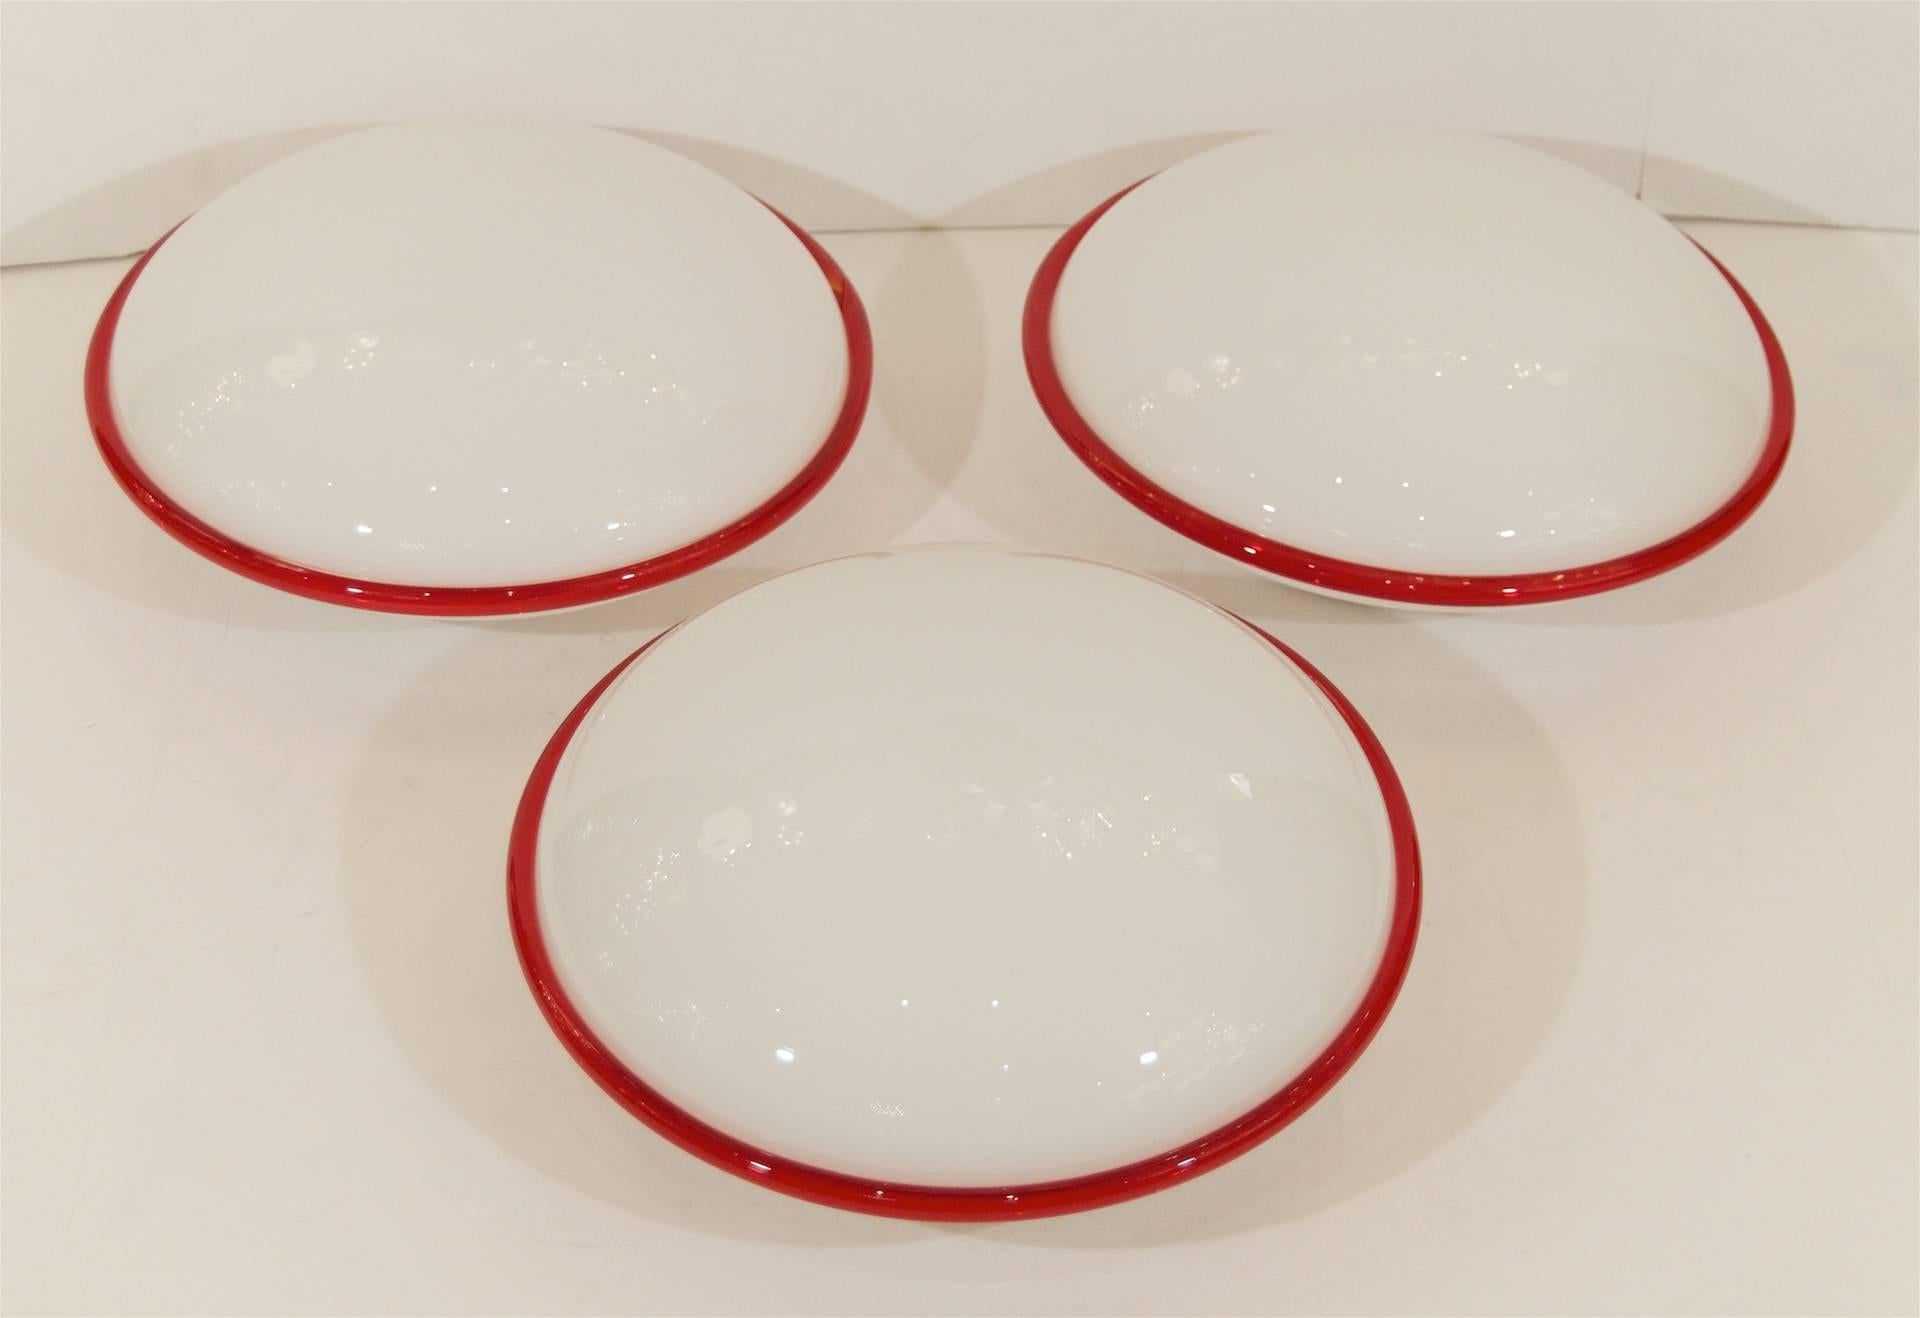 Round gloss white glass with a fused clear and red glass border detail, by Leucos Murano. 

One medium base bulb up to 60 watts per bulb. New wiring.

Please note price is per fixture. One available.